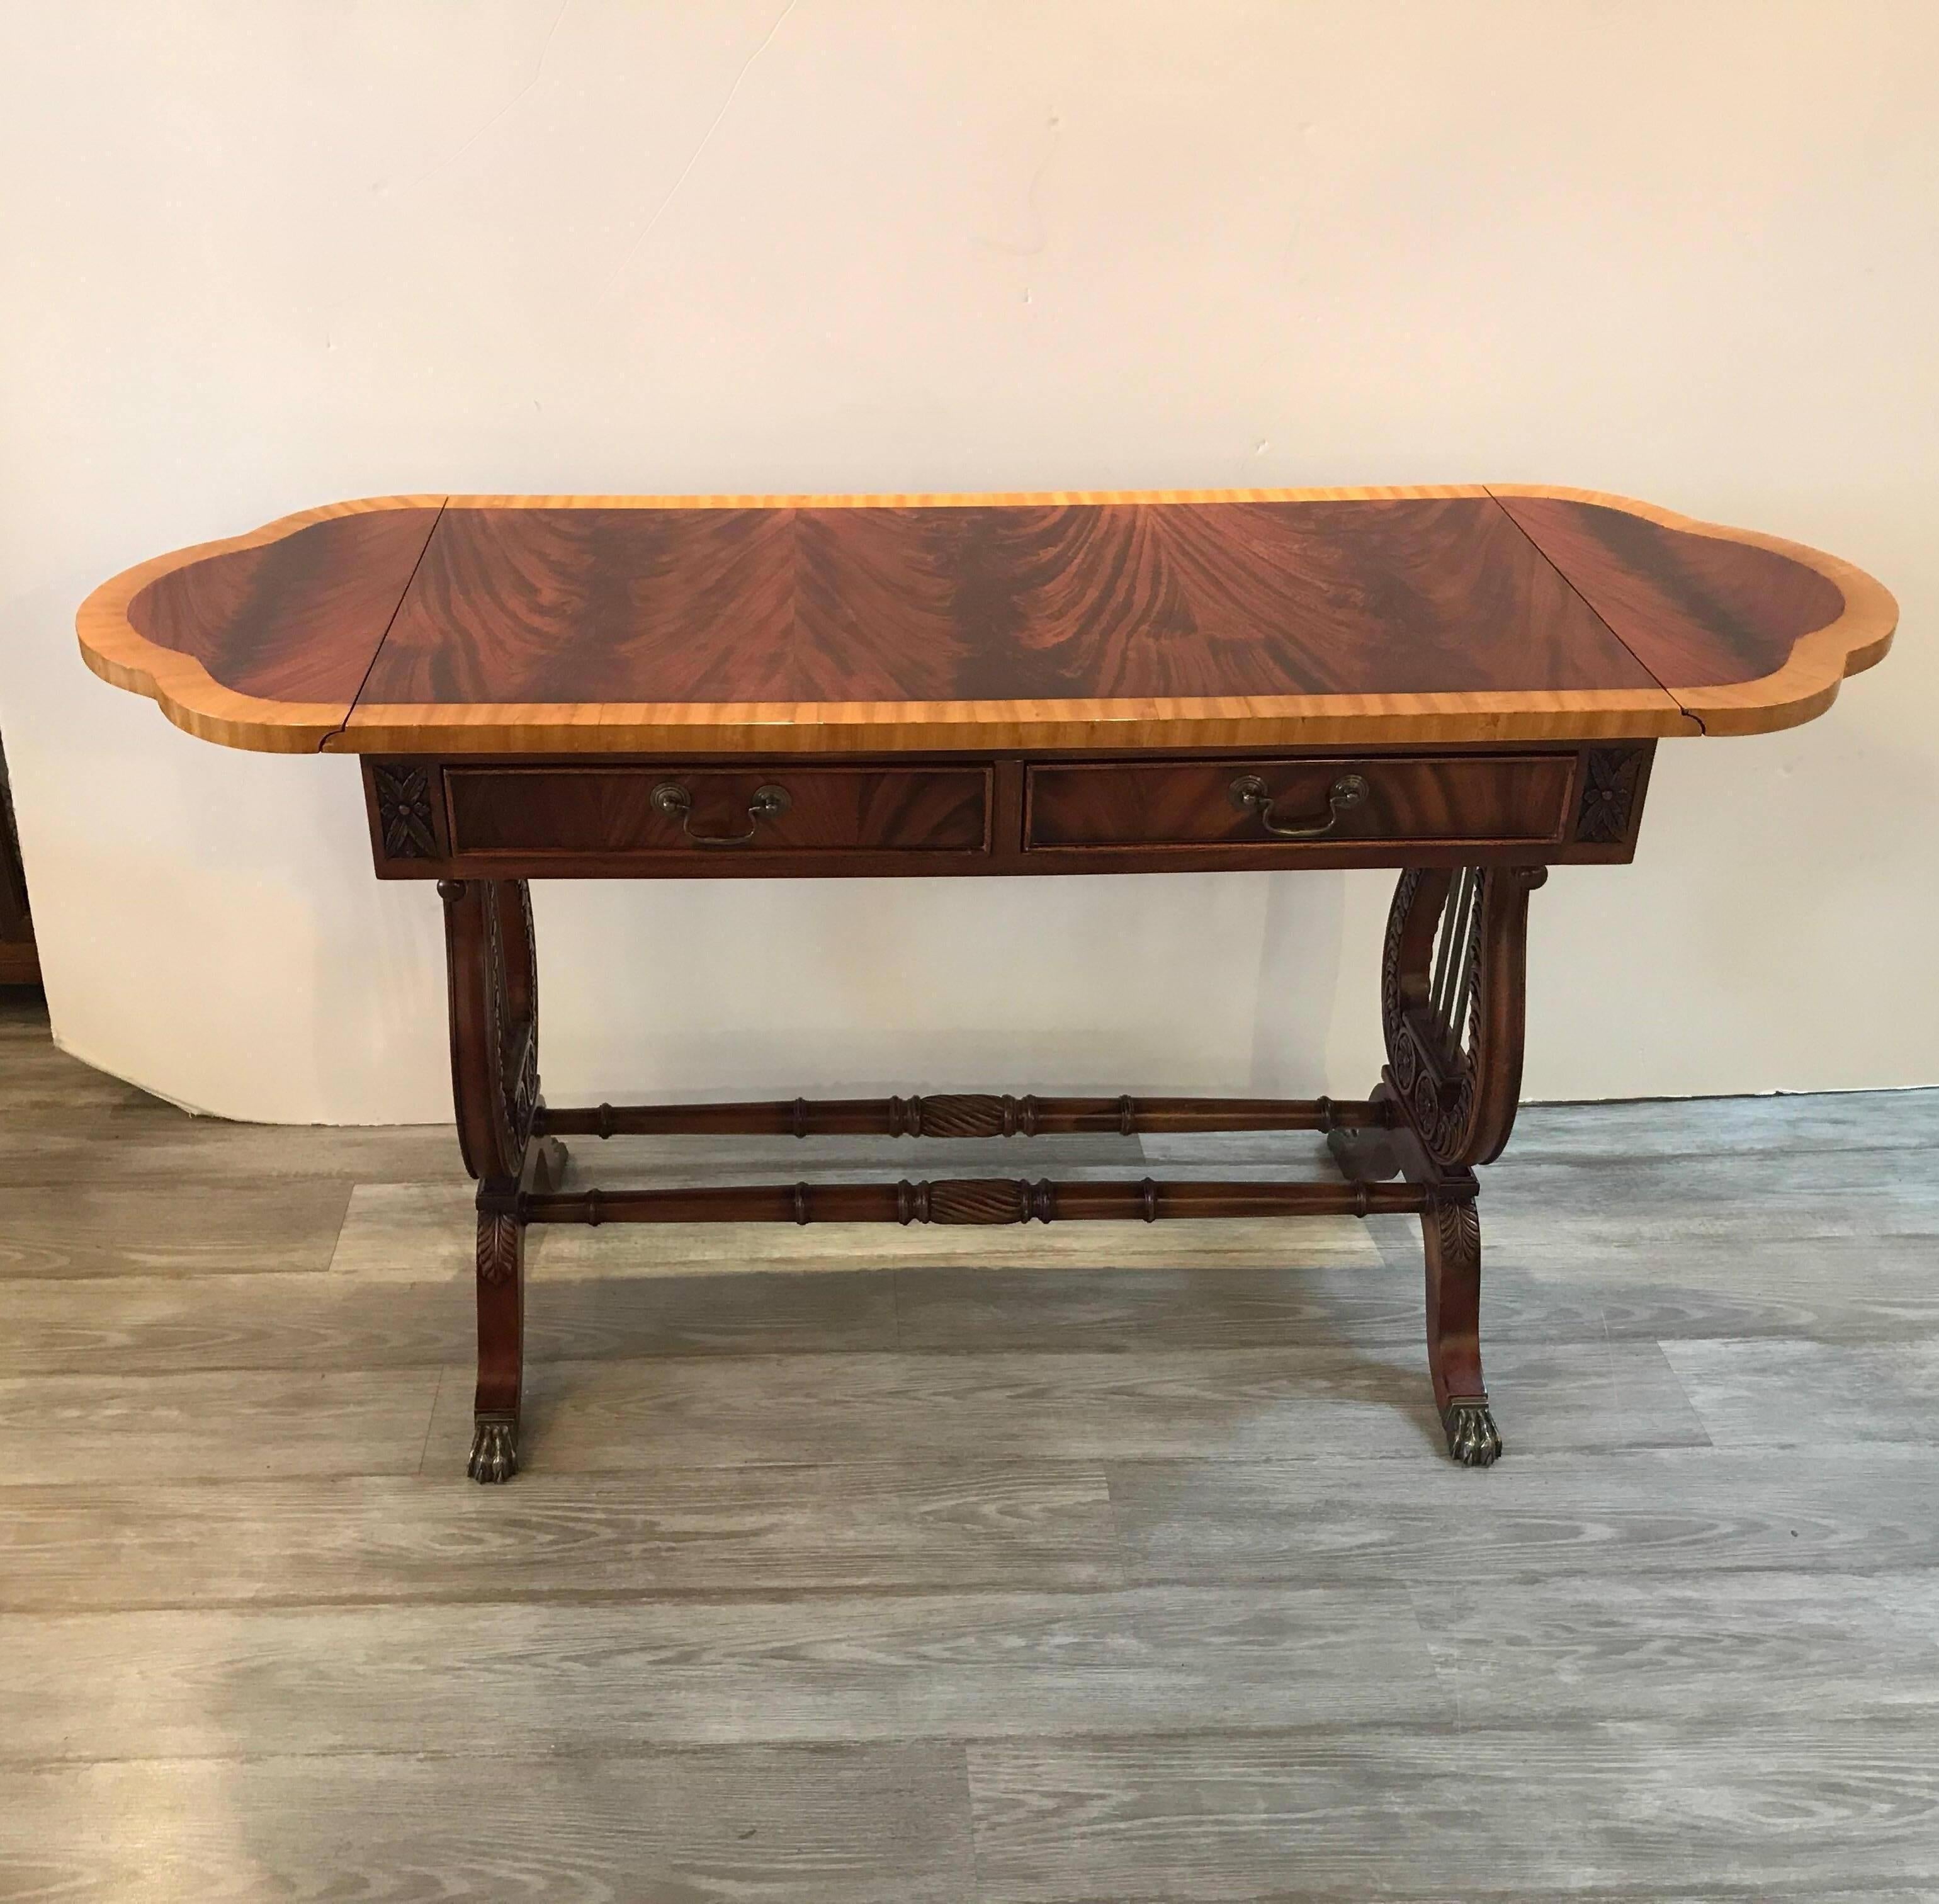 Elegant flame mahogany and satinwood console sofa table with drawers. The figurative top with drop leaf sides with two small drawers below. The base with carved lyre shaped sides and stretcher base. The piece is 40 inches wide with a 10.5 inch leaf